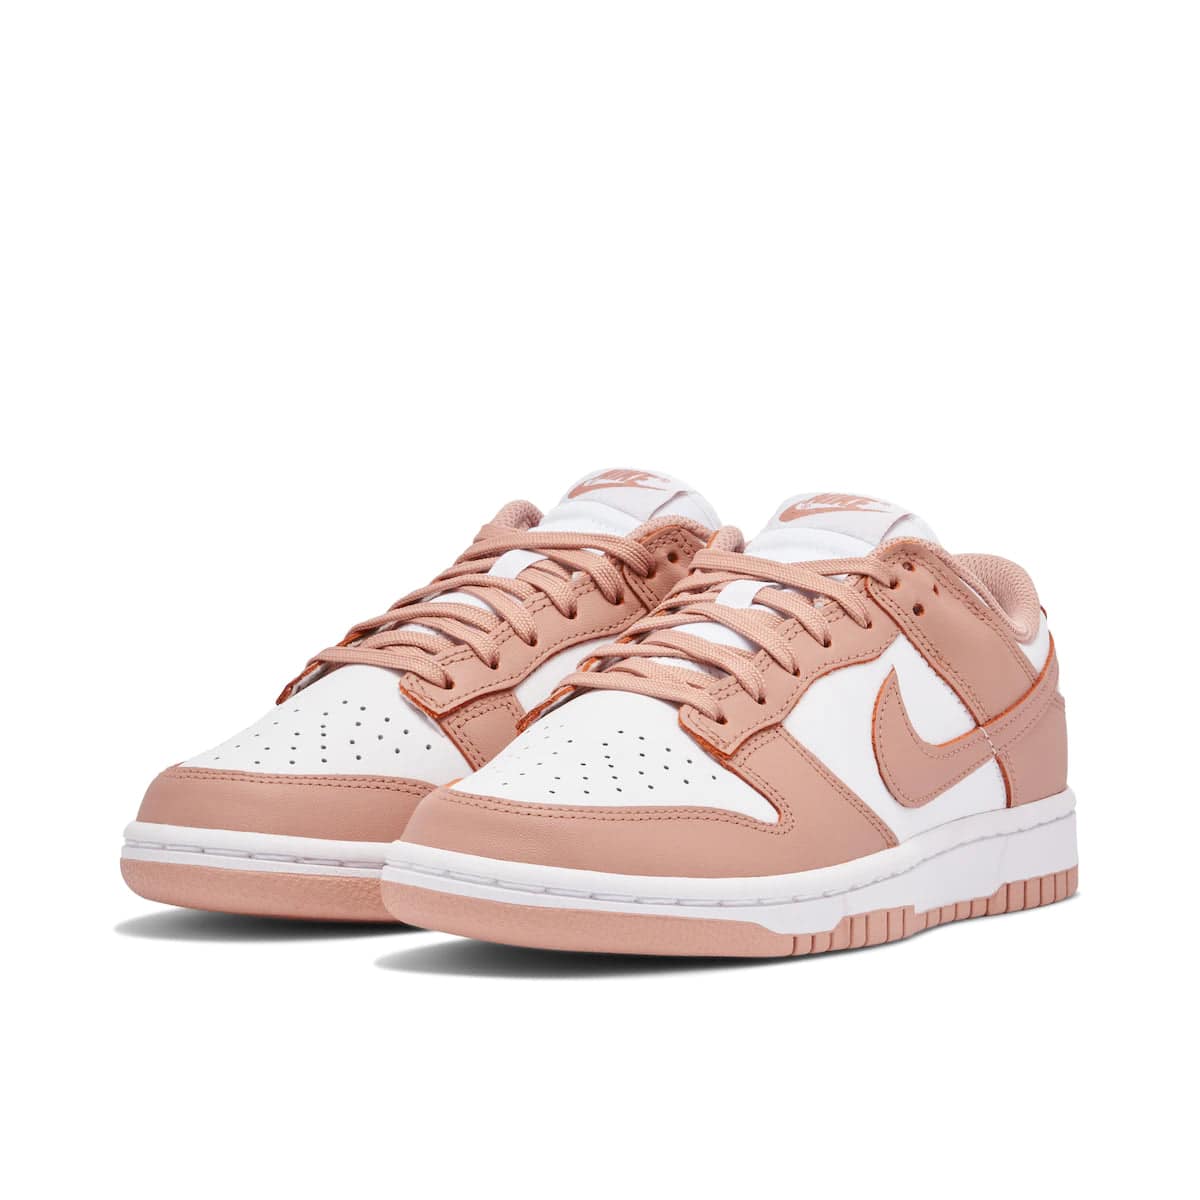 NIKE DUNK LOW WMNS 'ROSE WHISPER' - No Sauce The Plug